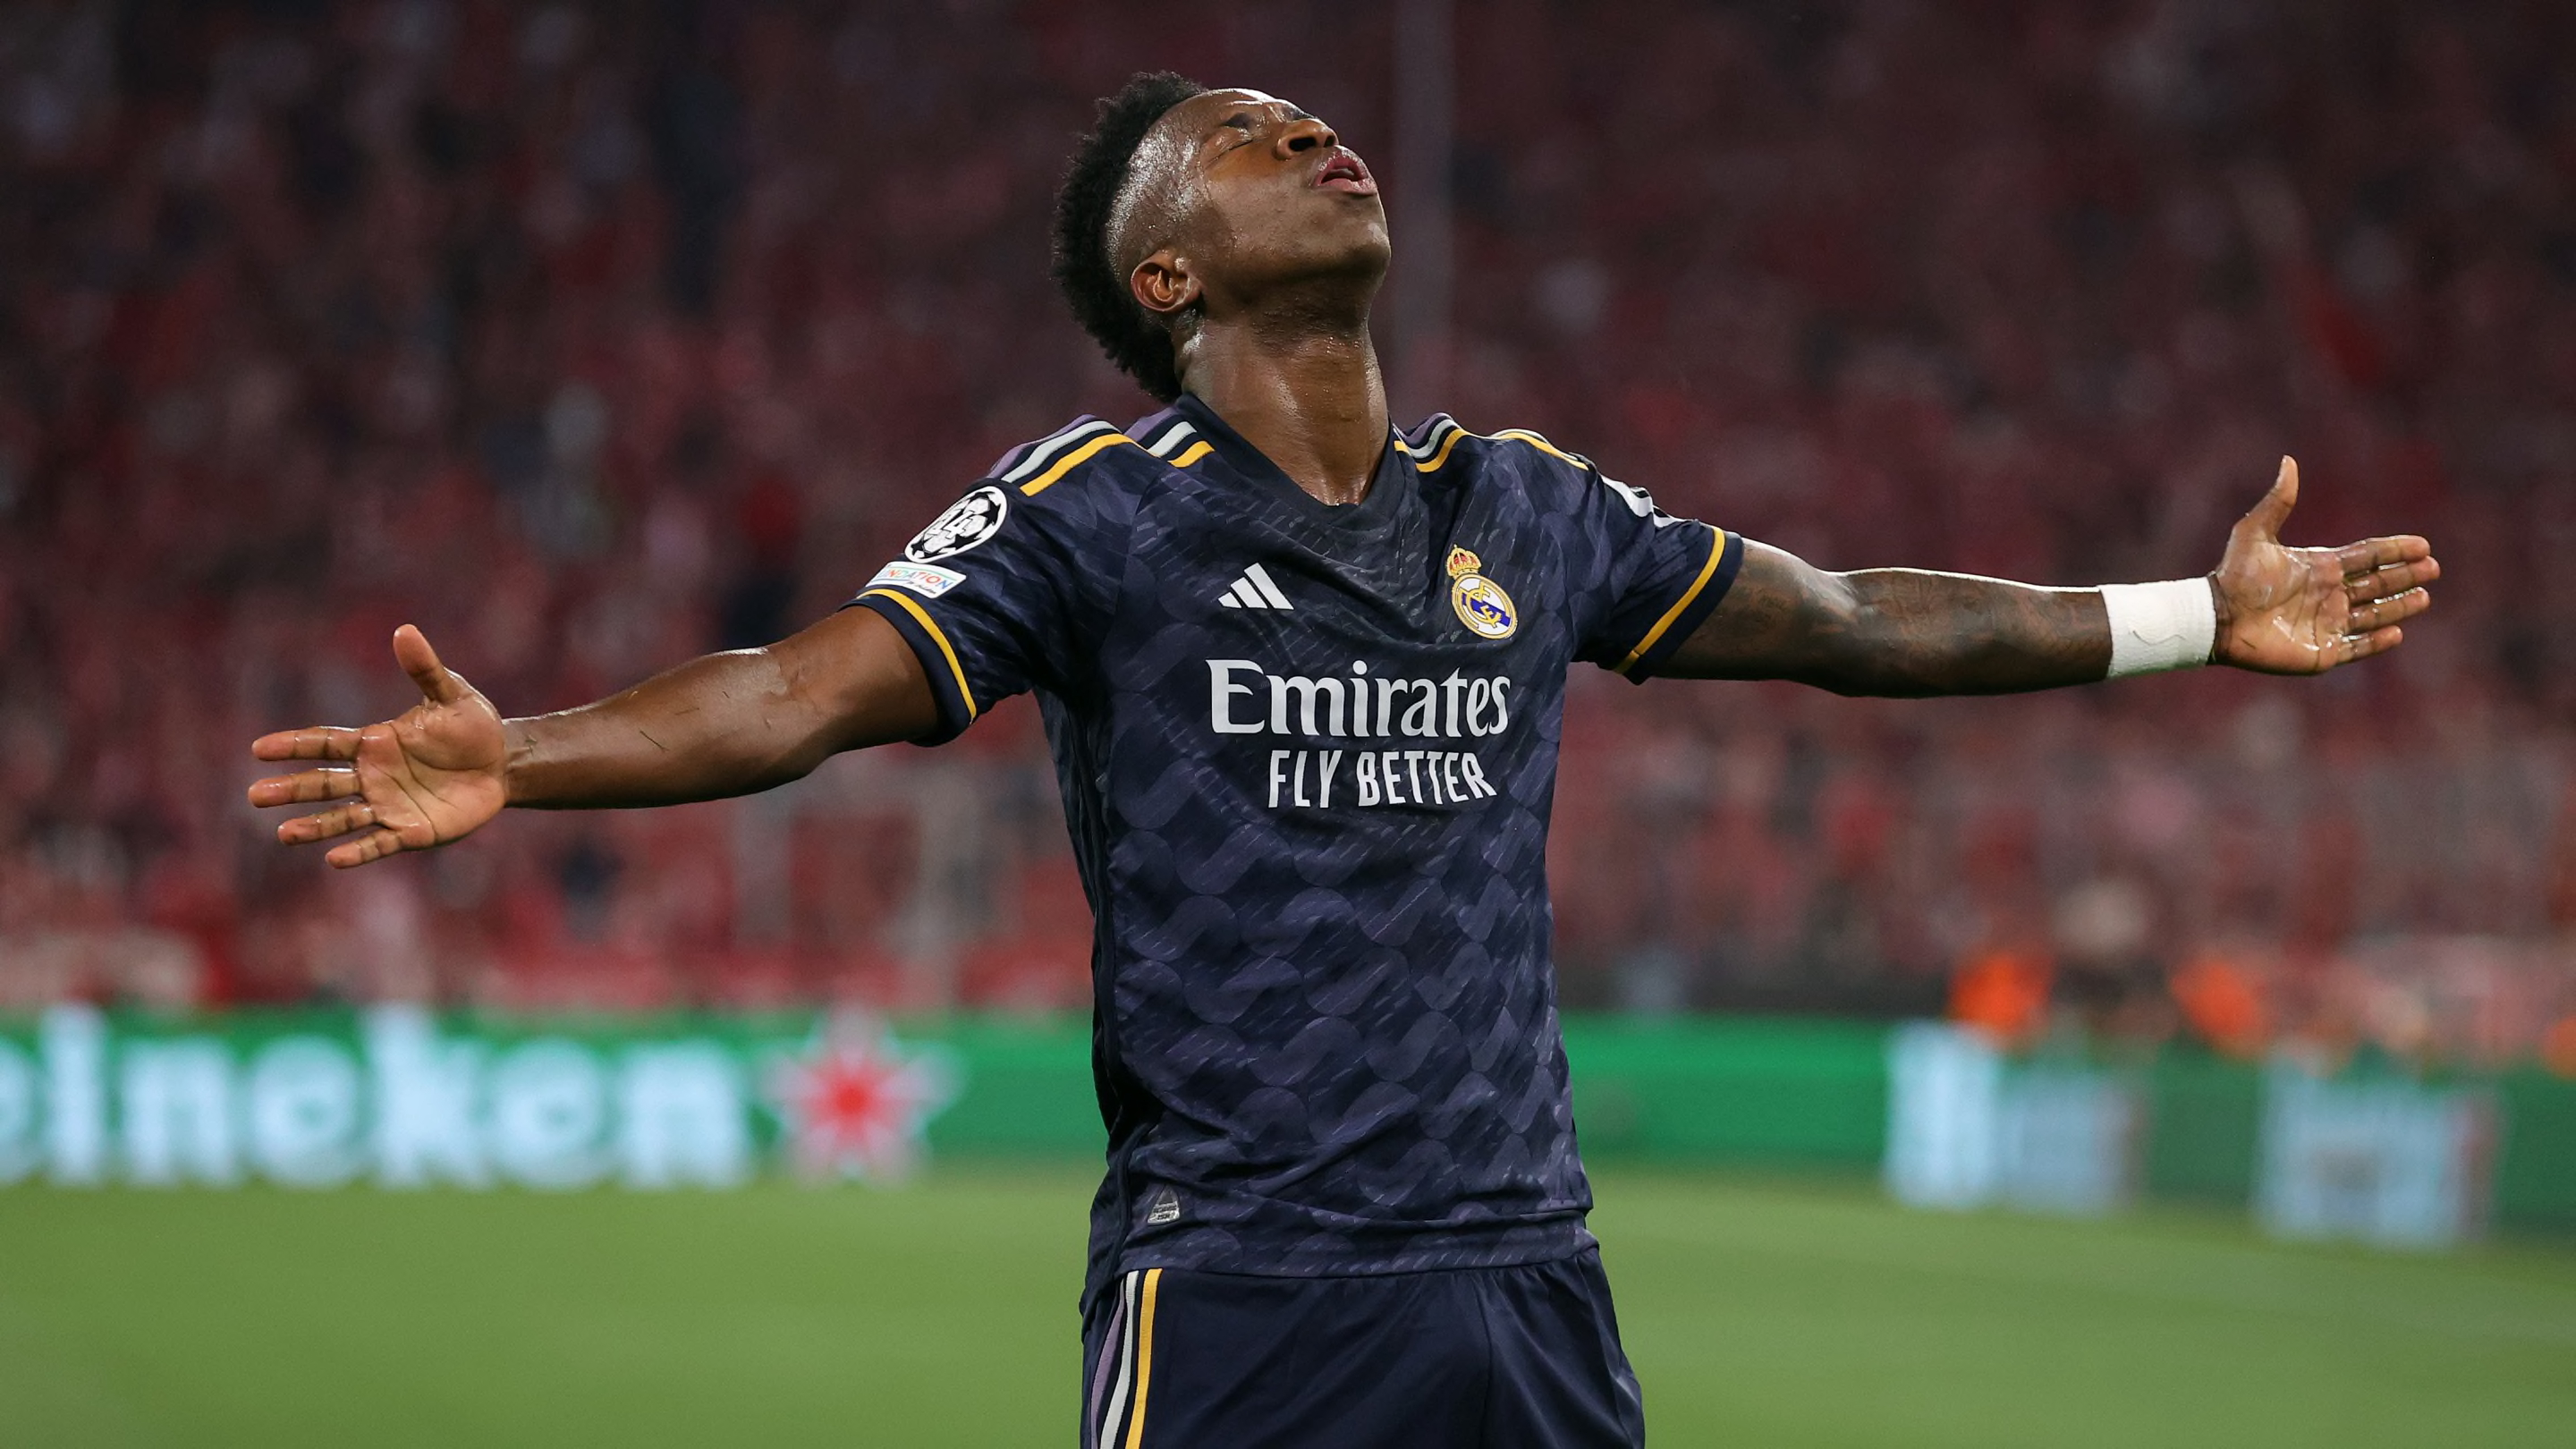 Bayern Munich 2-2 Real Madrid: Player ratings as late Vinicius penalty sees spoils shared in semi-final first leg